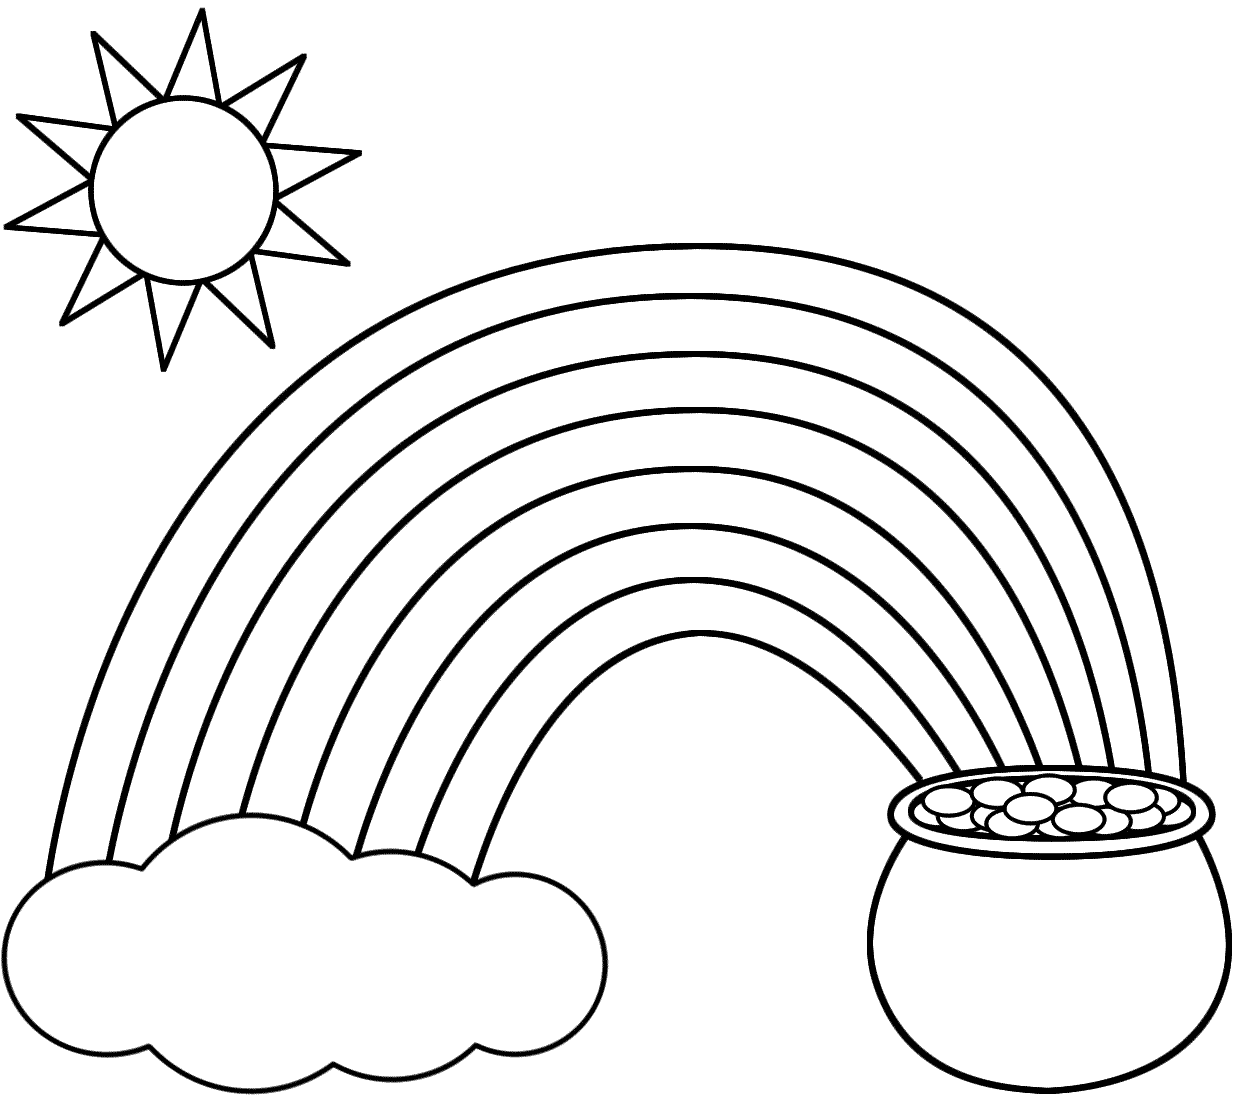 Coloring pages clouds.